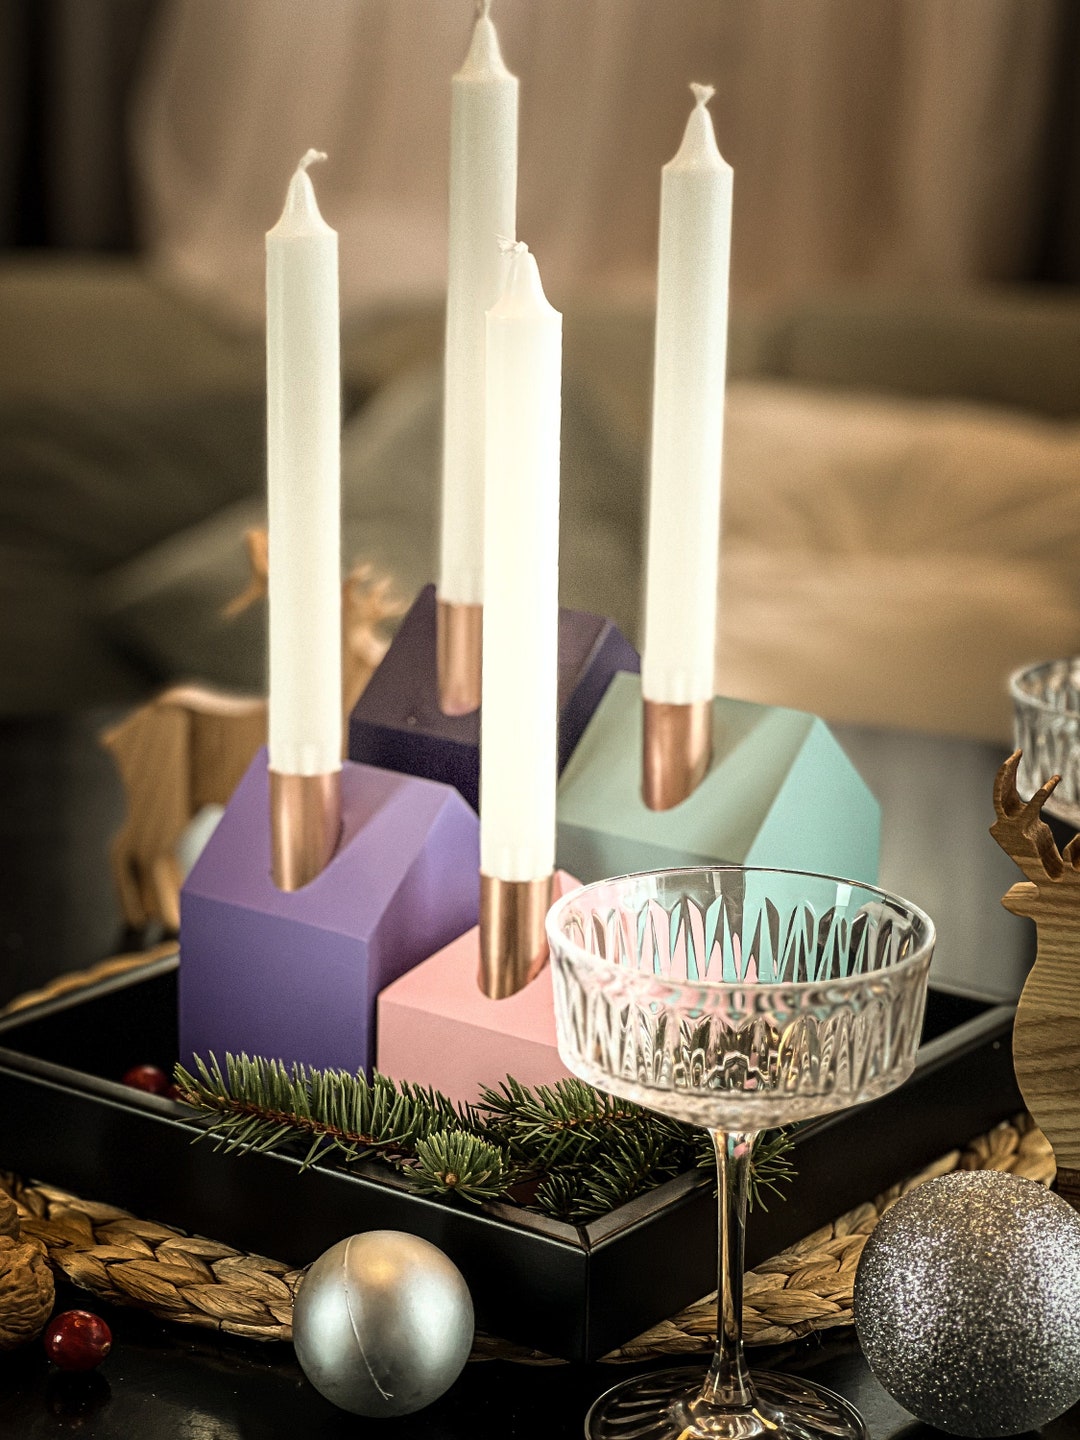 BUNDLE Advent Wreath and Soy Advent Candles – Be A Heart